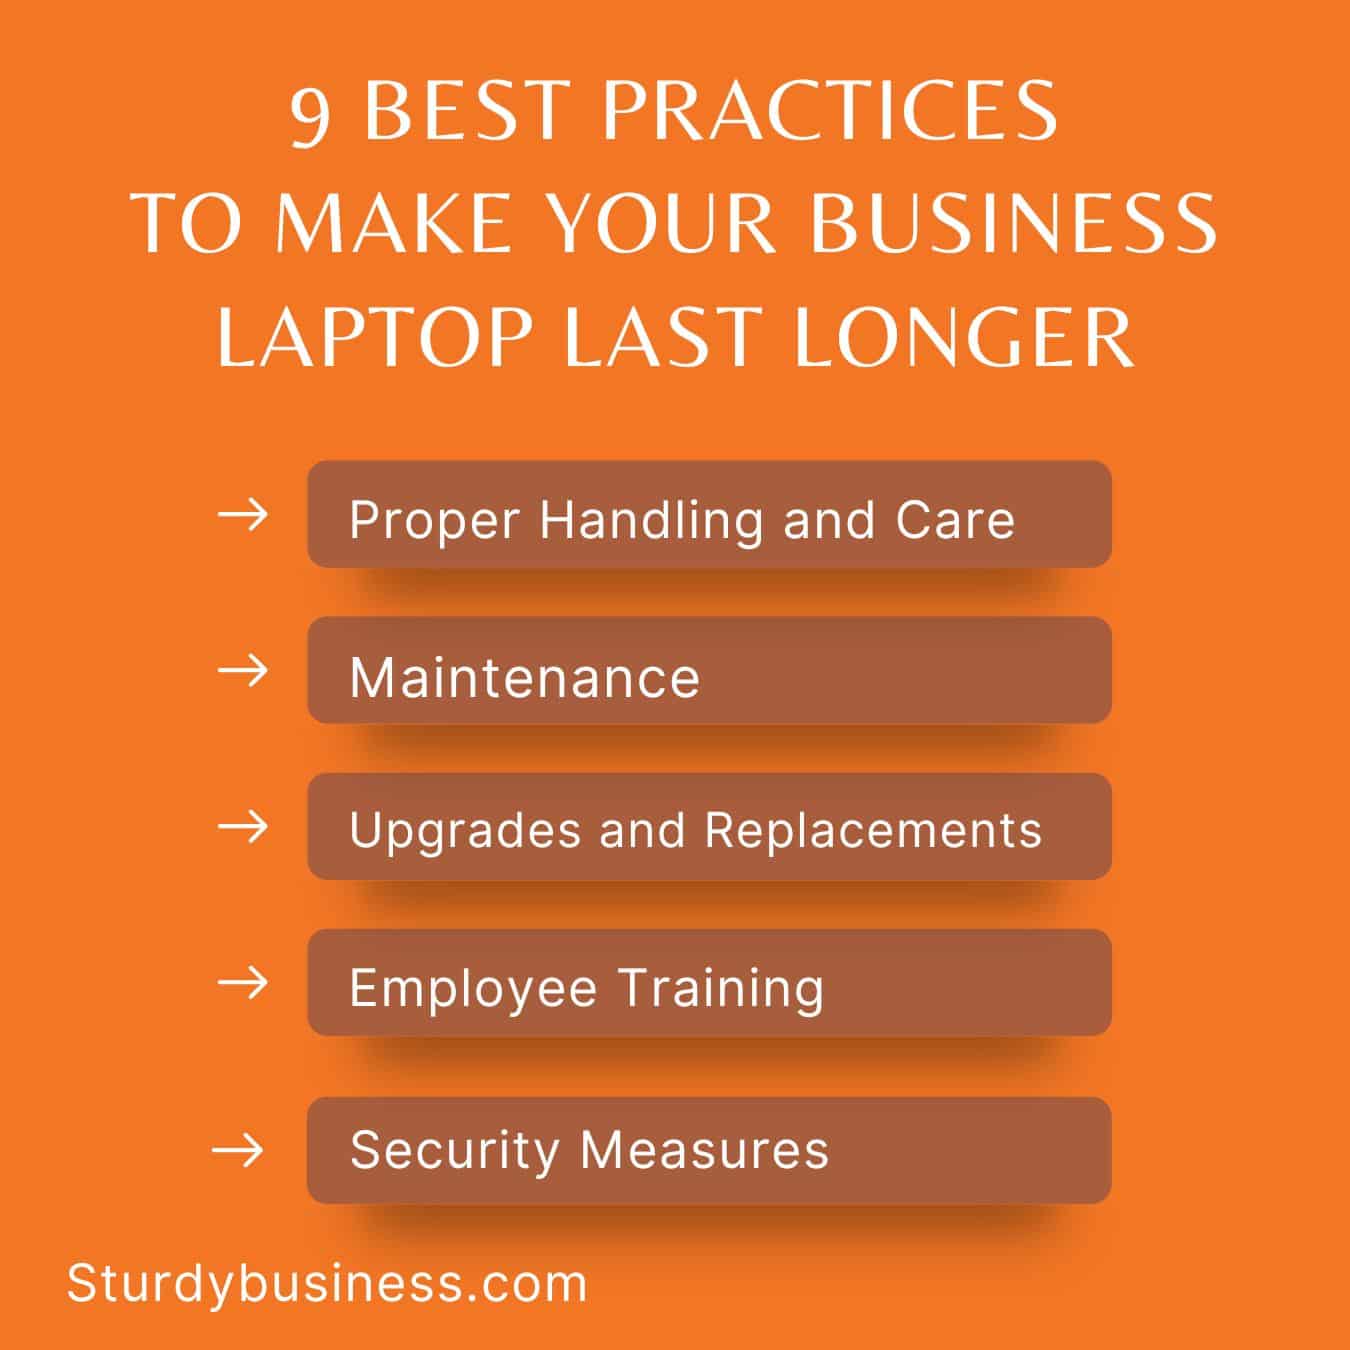 Best Practices To Make Your Business Laptop Last Longer